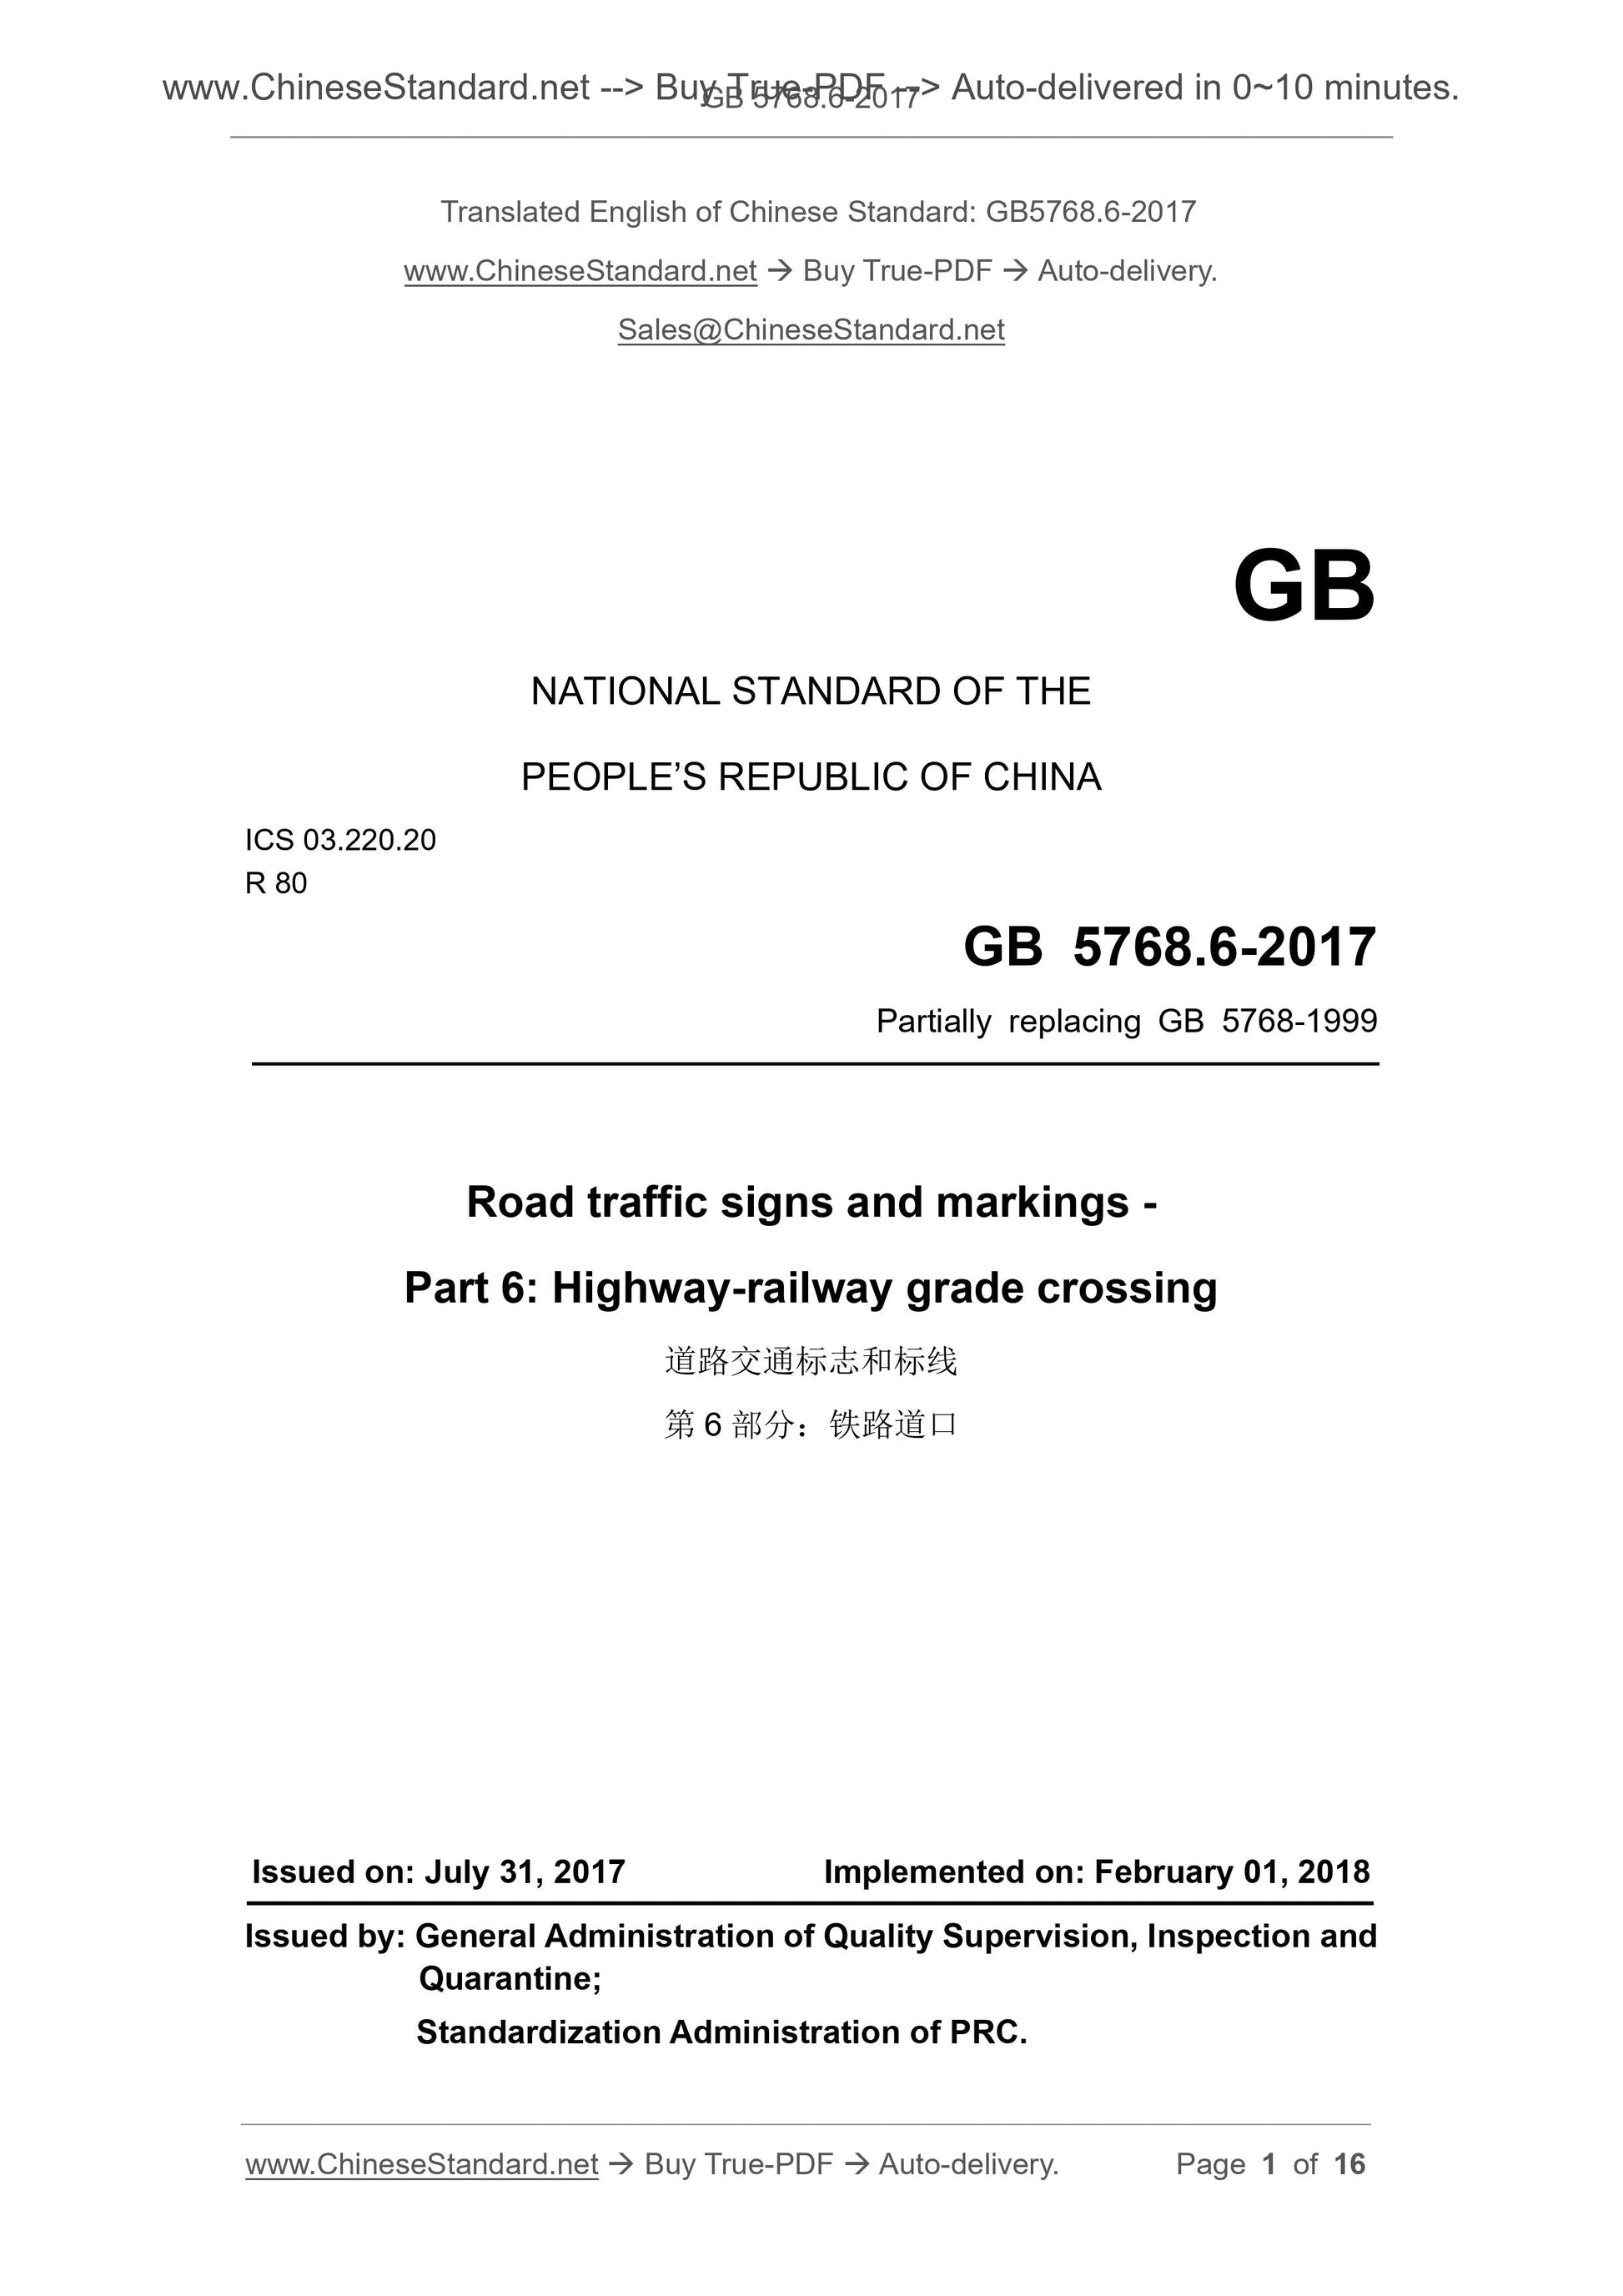 GB 5768.6-2017 Page 1